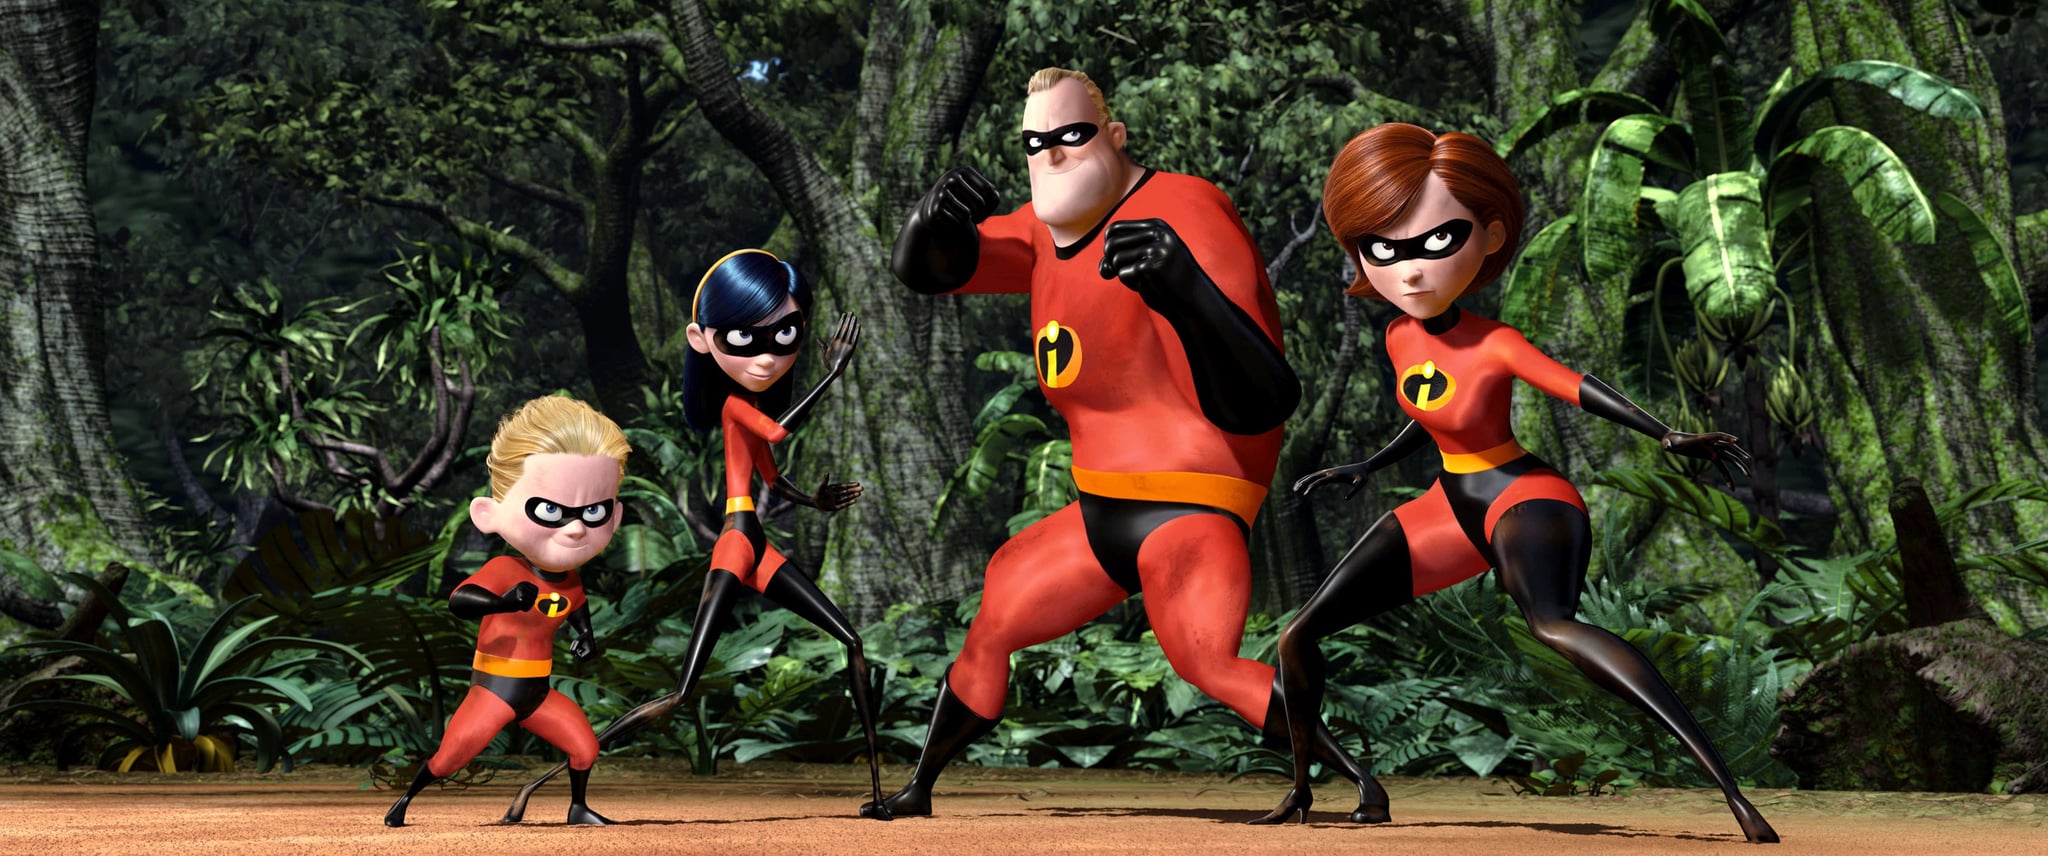 Image result for the incredibles